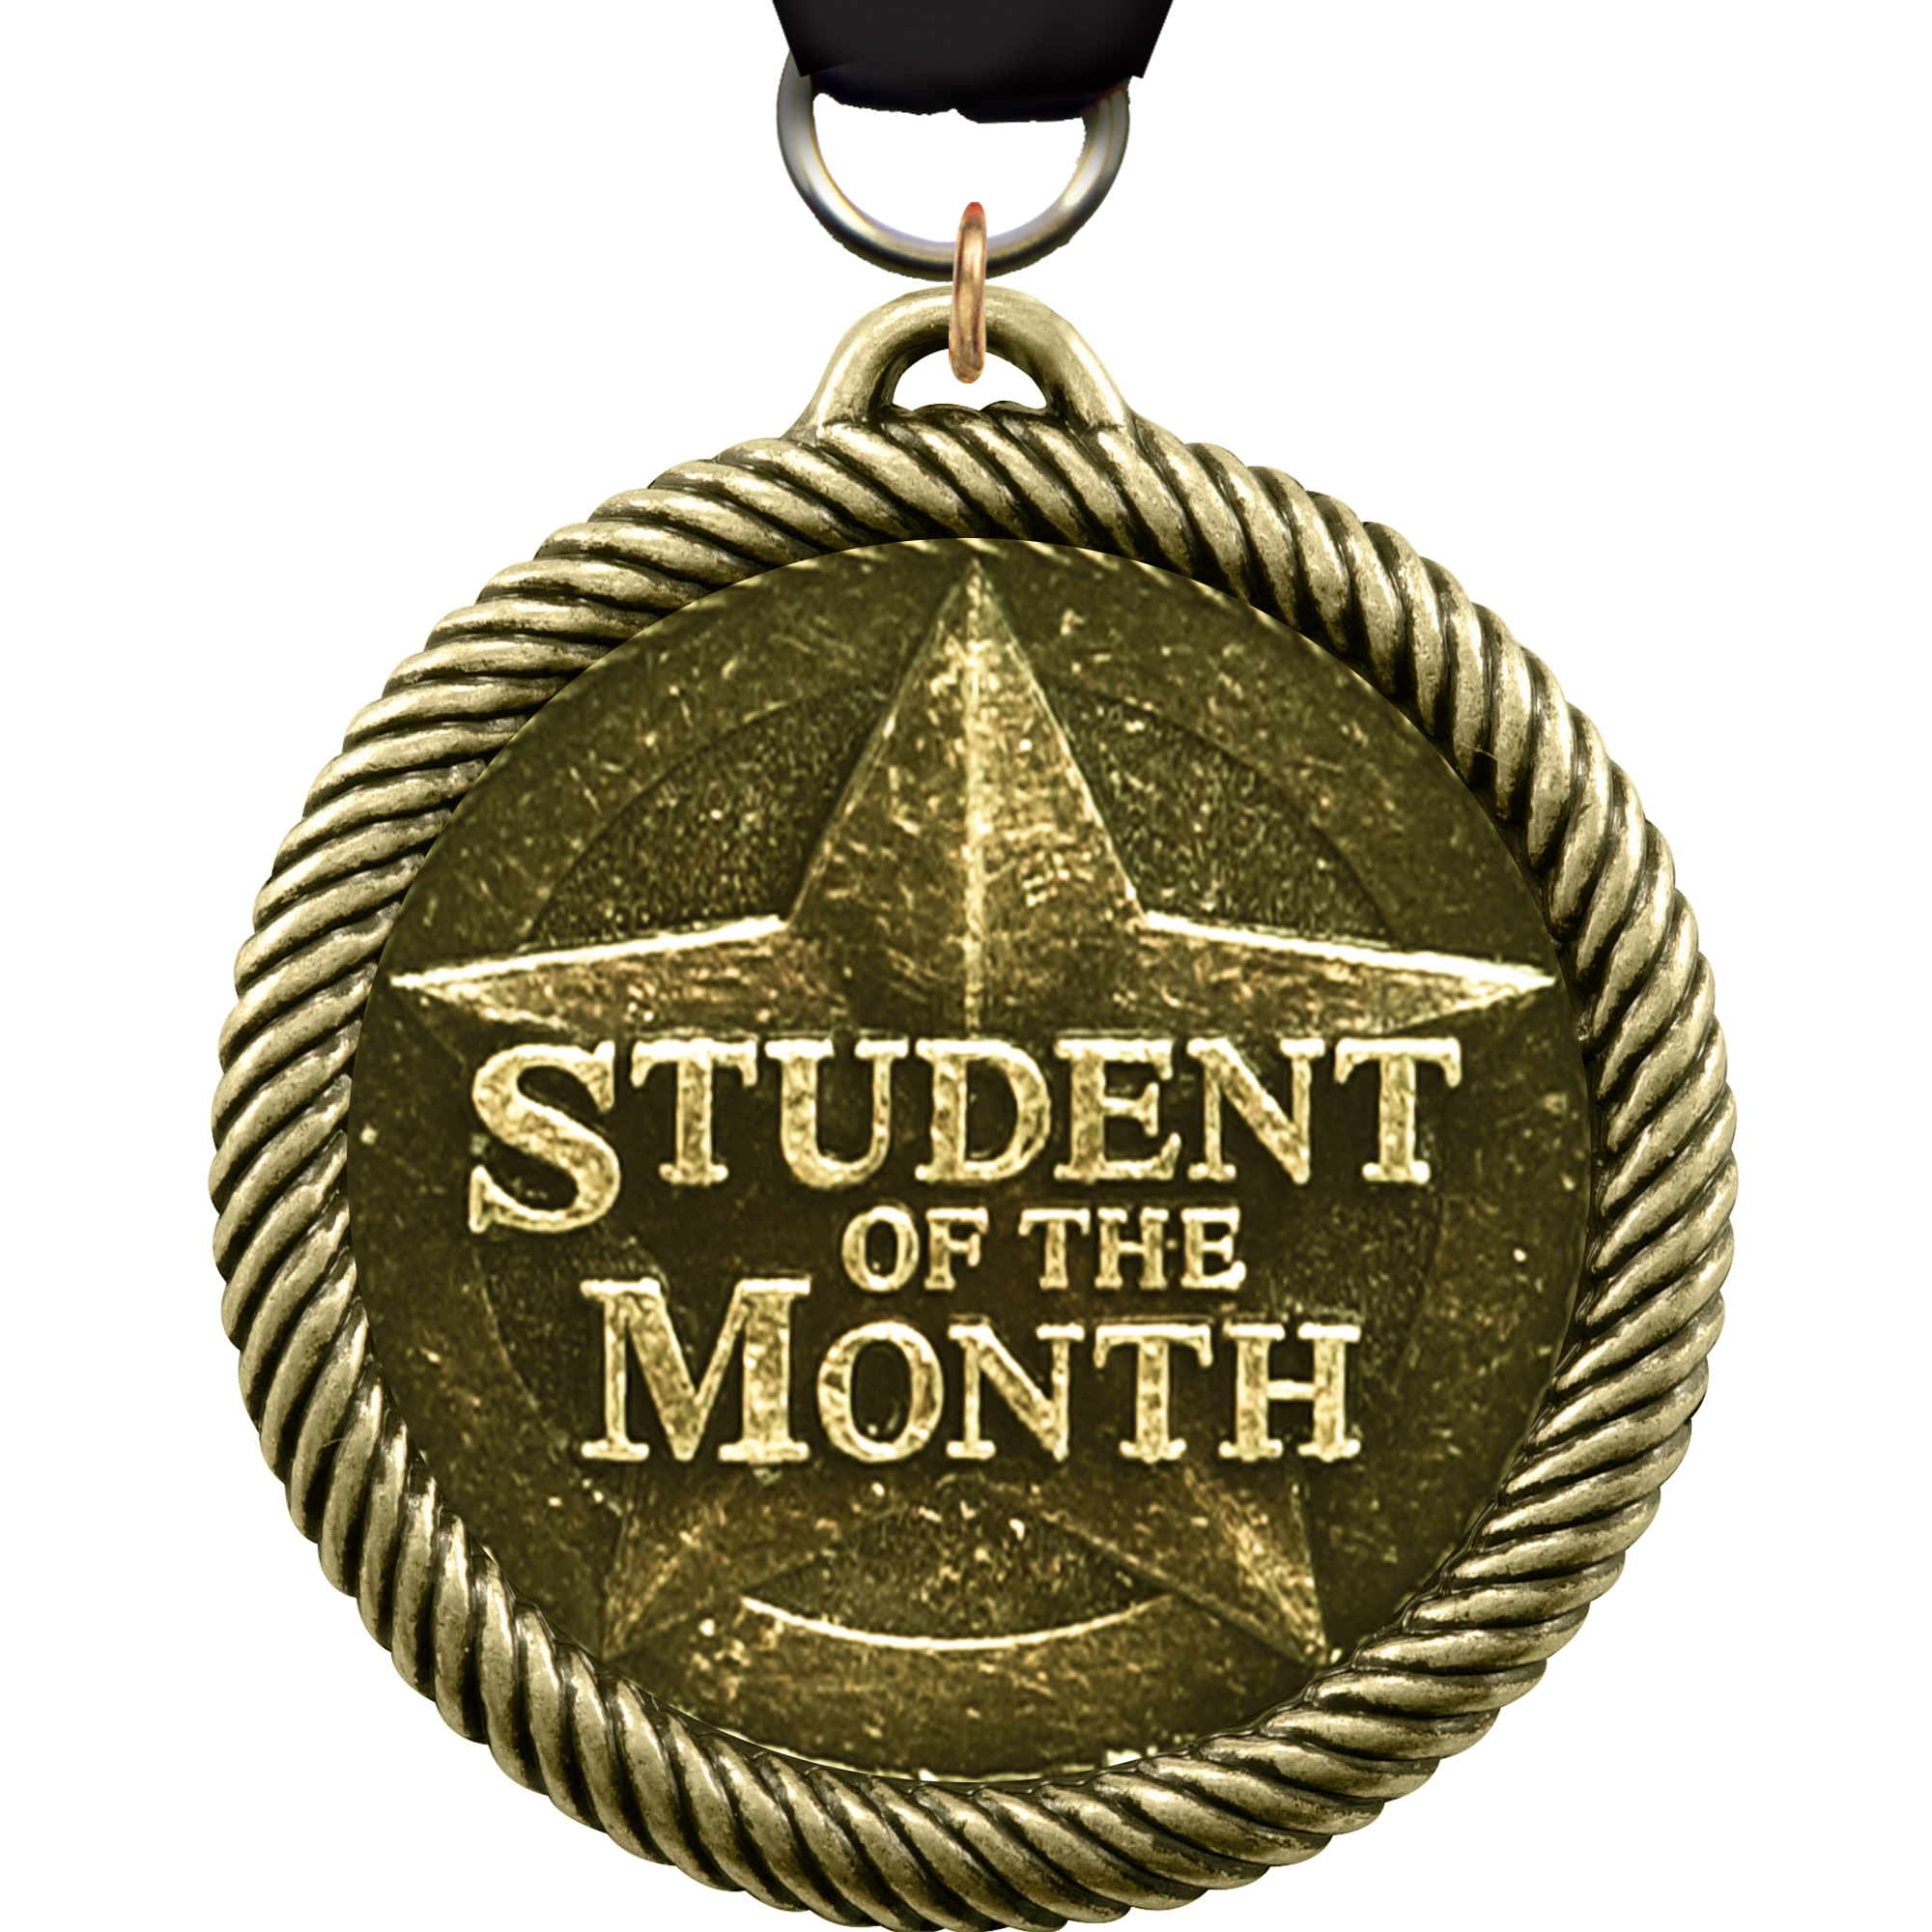 Student of the month Scholastic Medal